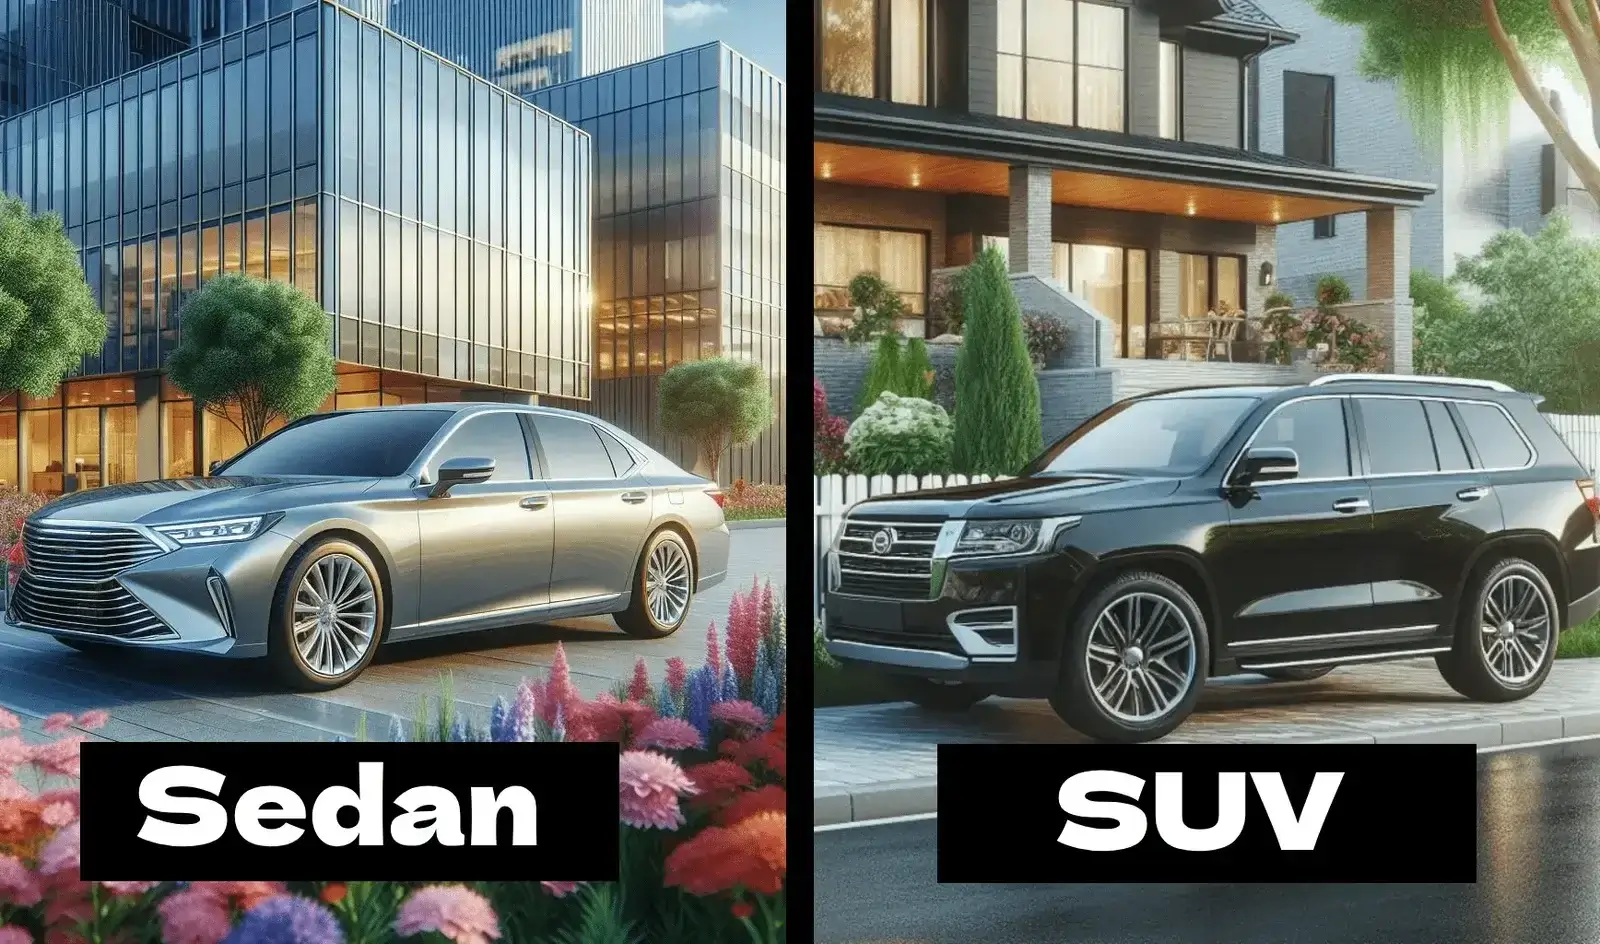 SUV or Sedan: Which Vehicle Fits Your Needs Best?